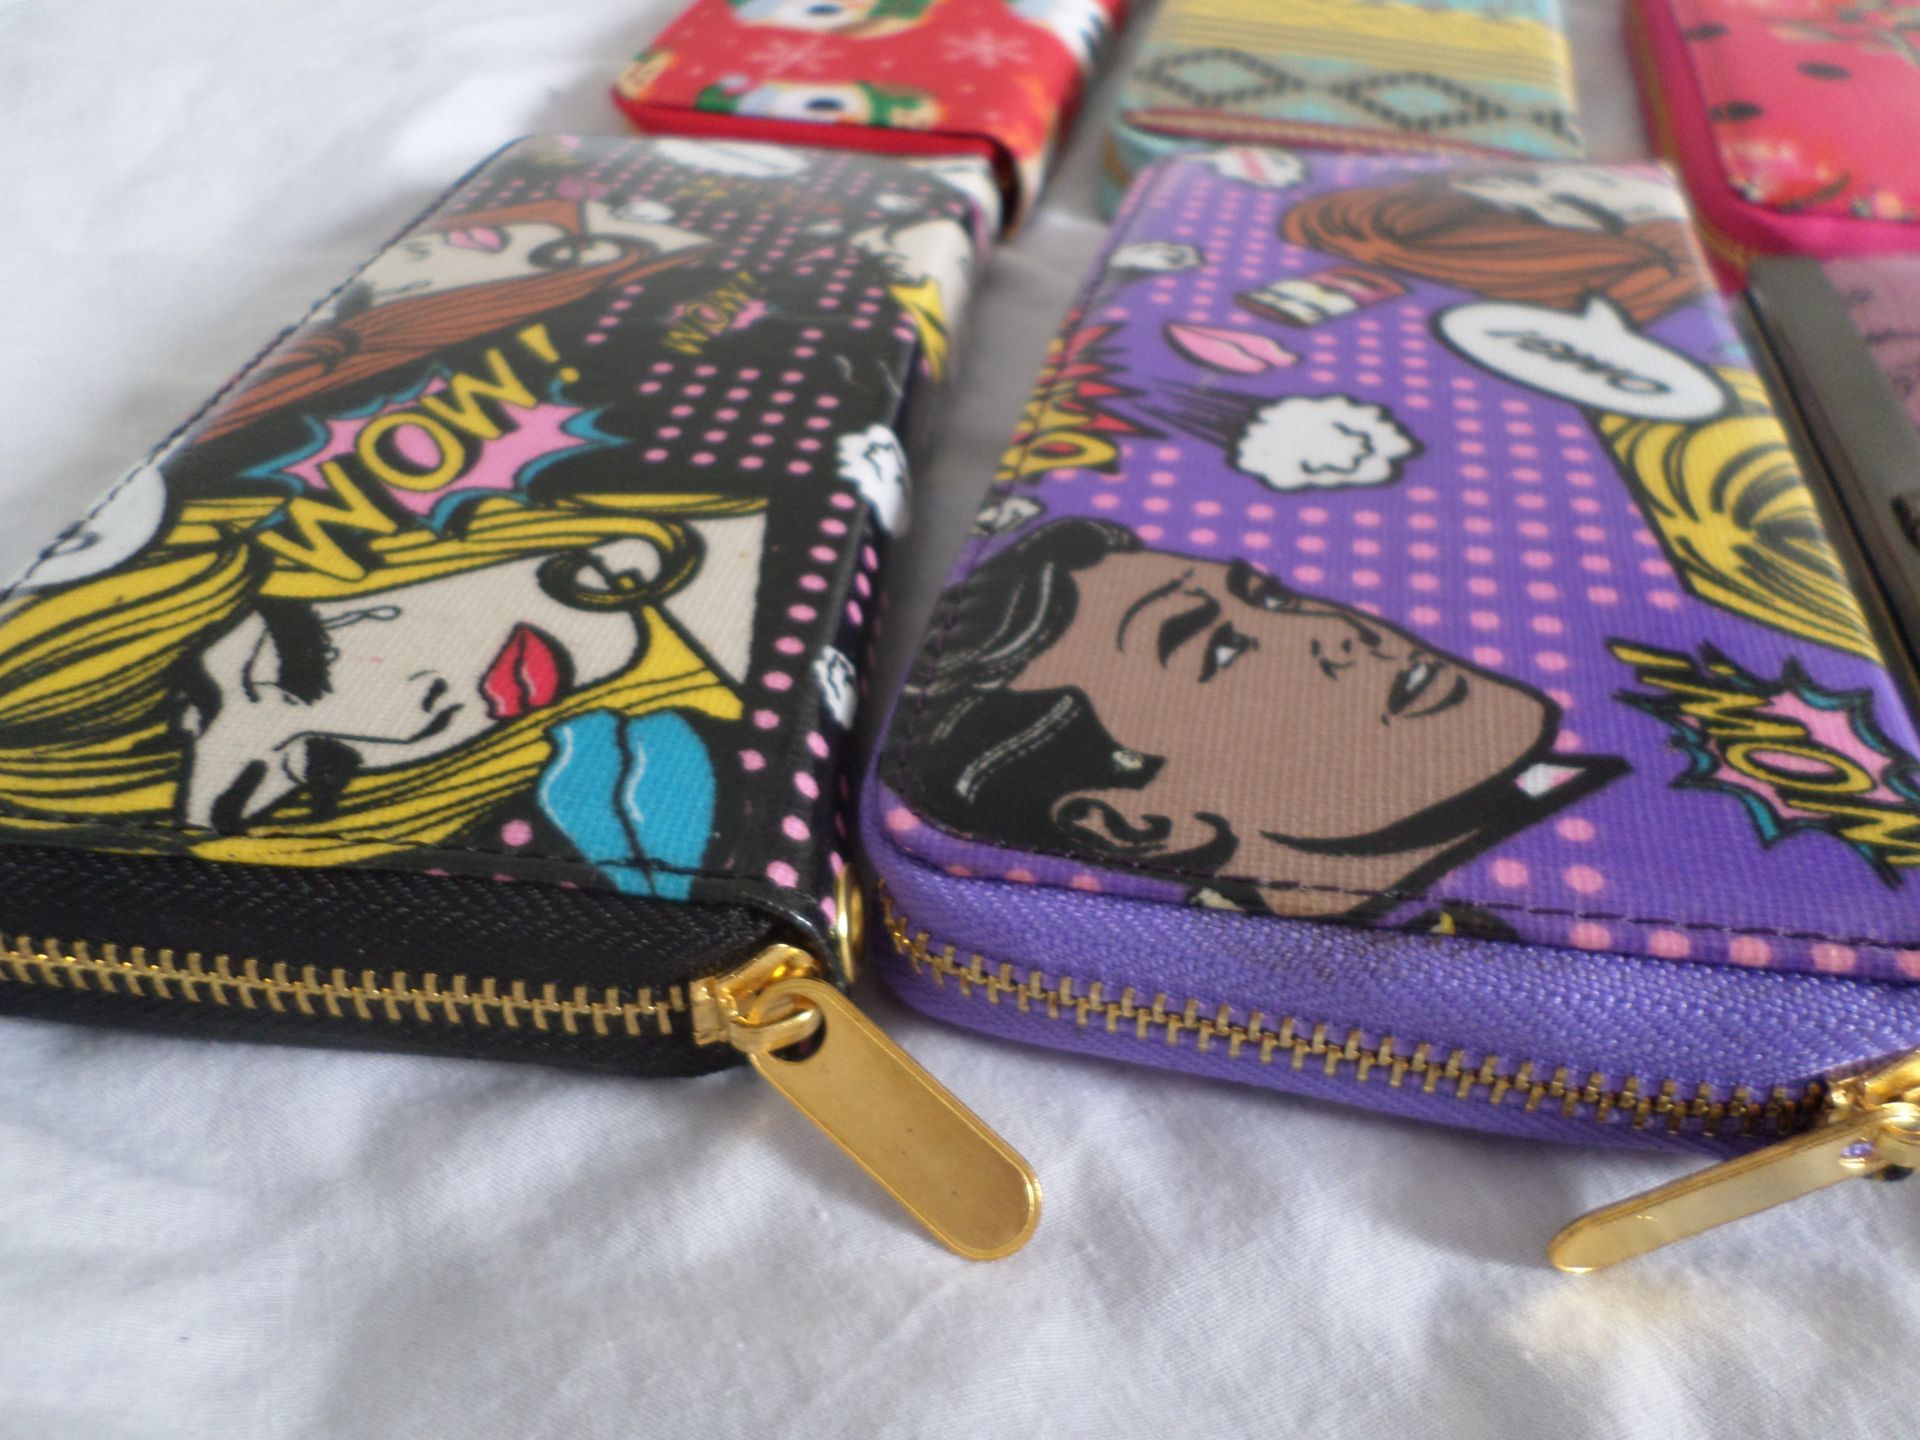 20 x Ladies Clutch/Purses RRP £14 Each. Brand New - Image 4 of 4